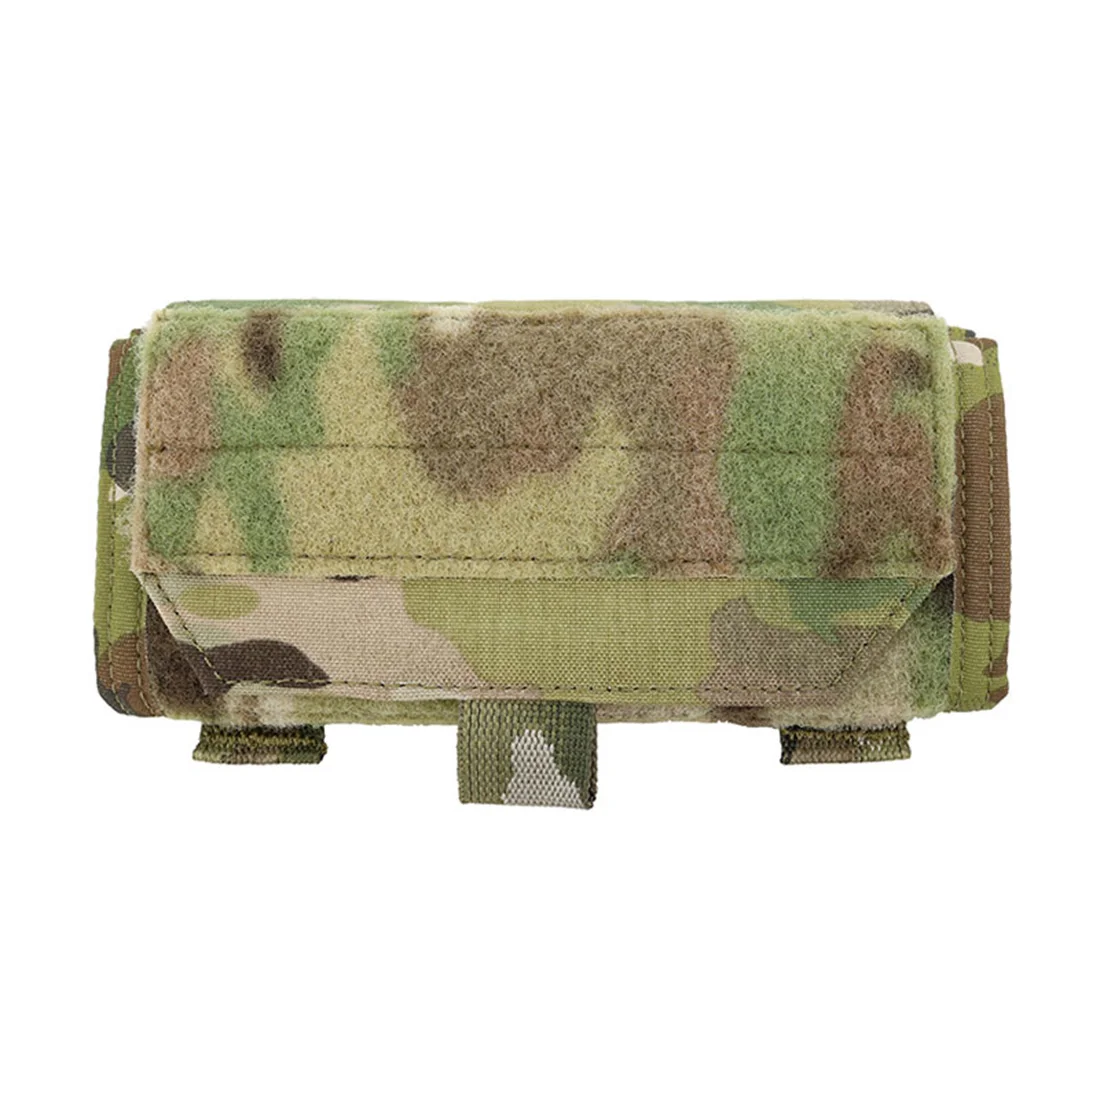 

ADMIN Tactical Chest Map Pouch Multifunction Folding Accessories Army Molle Tactical Bag - Multicam